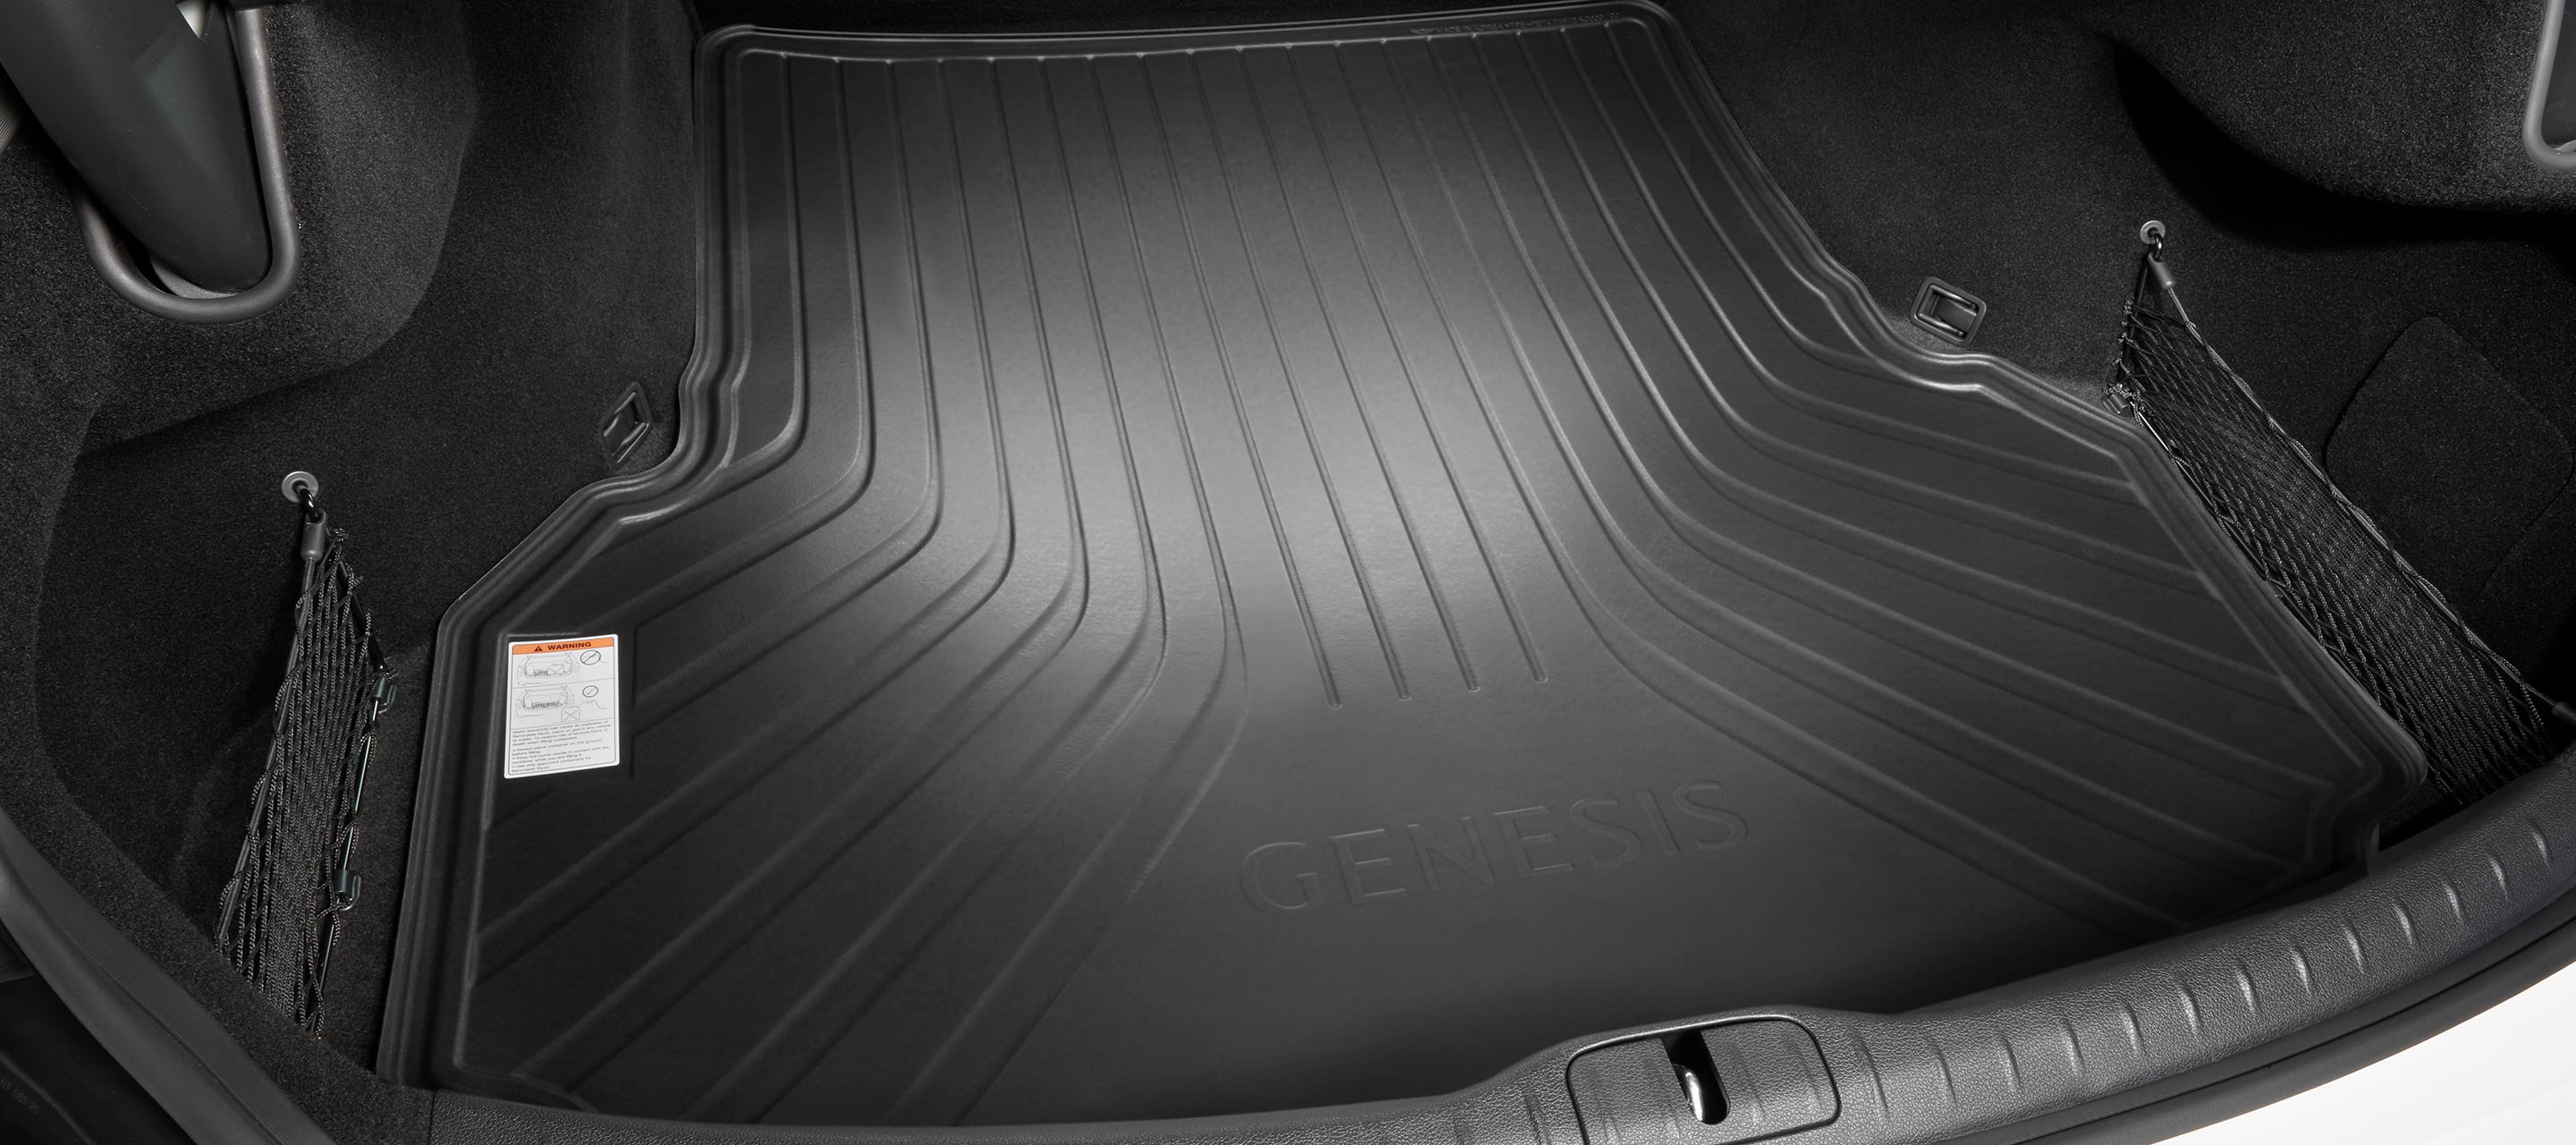 Cargo tray accessory for the 2023 Genesis G80.